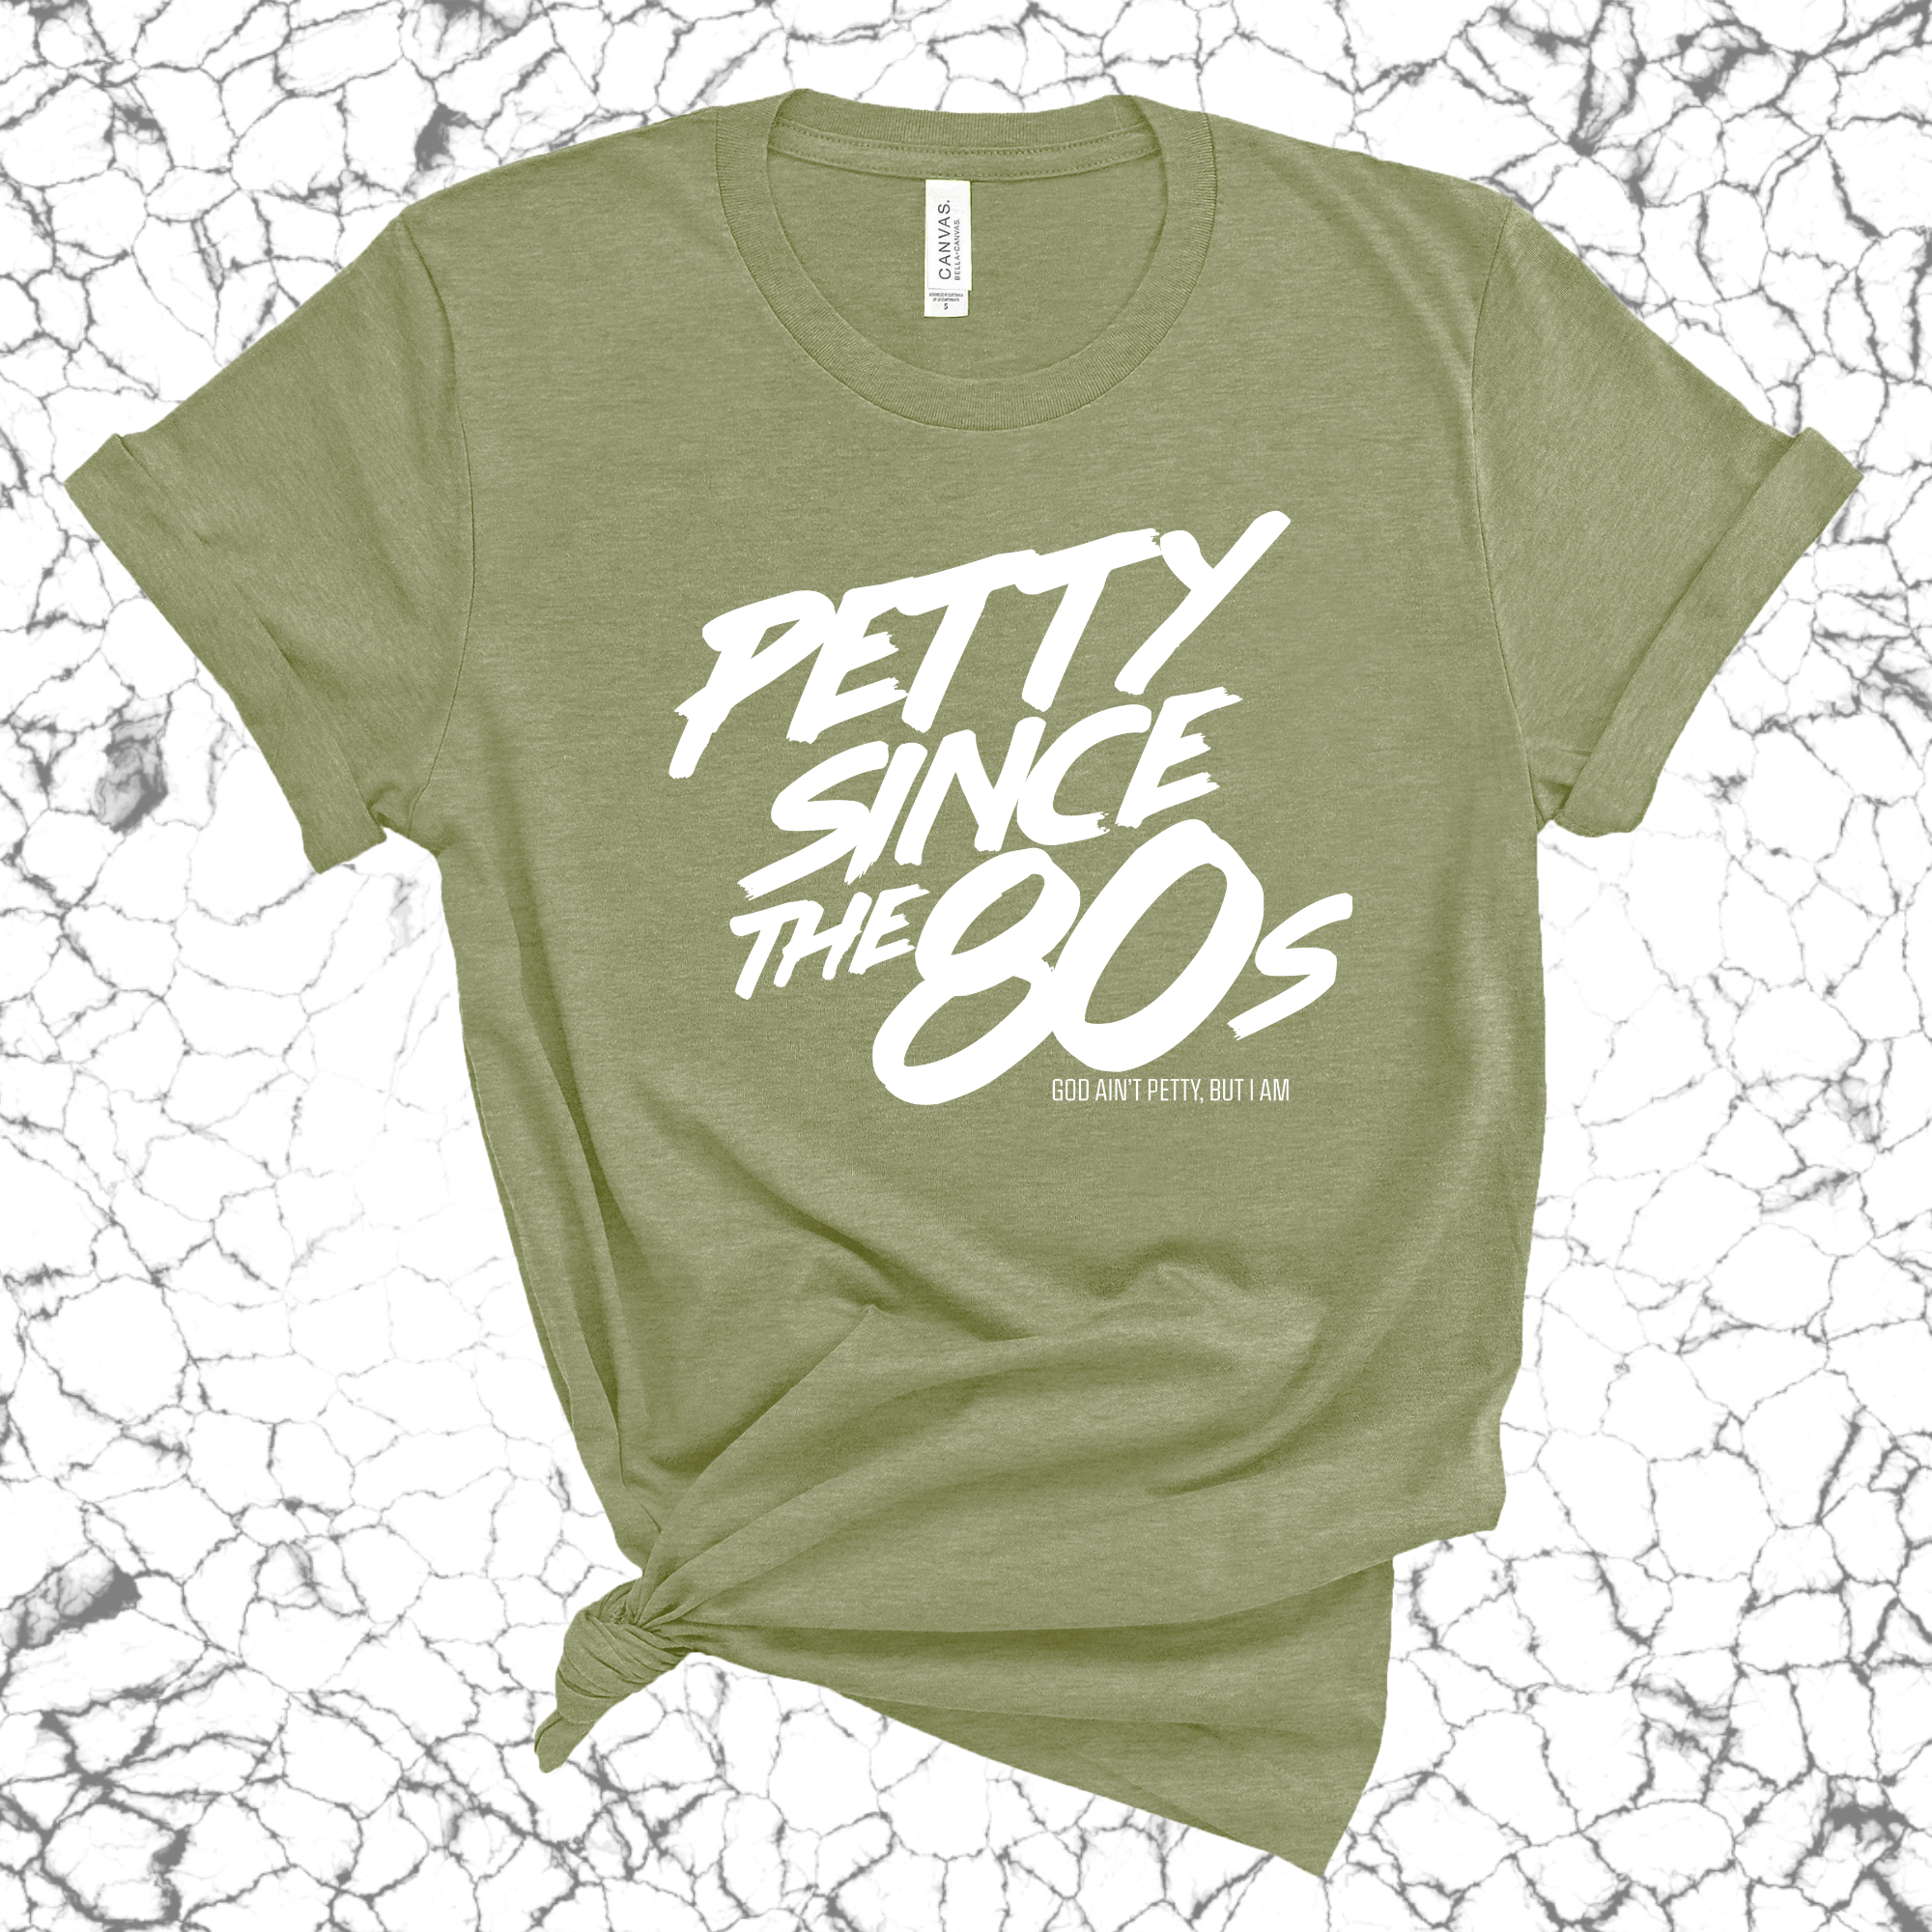 Petty Since the 80s Unisex Tee-T-Shirt-The Original God Ain't Petty But I Am